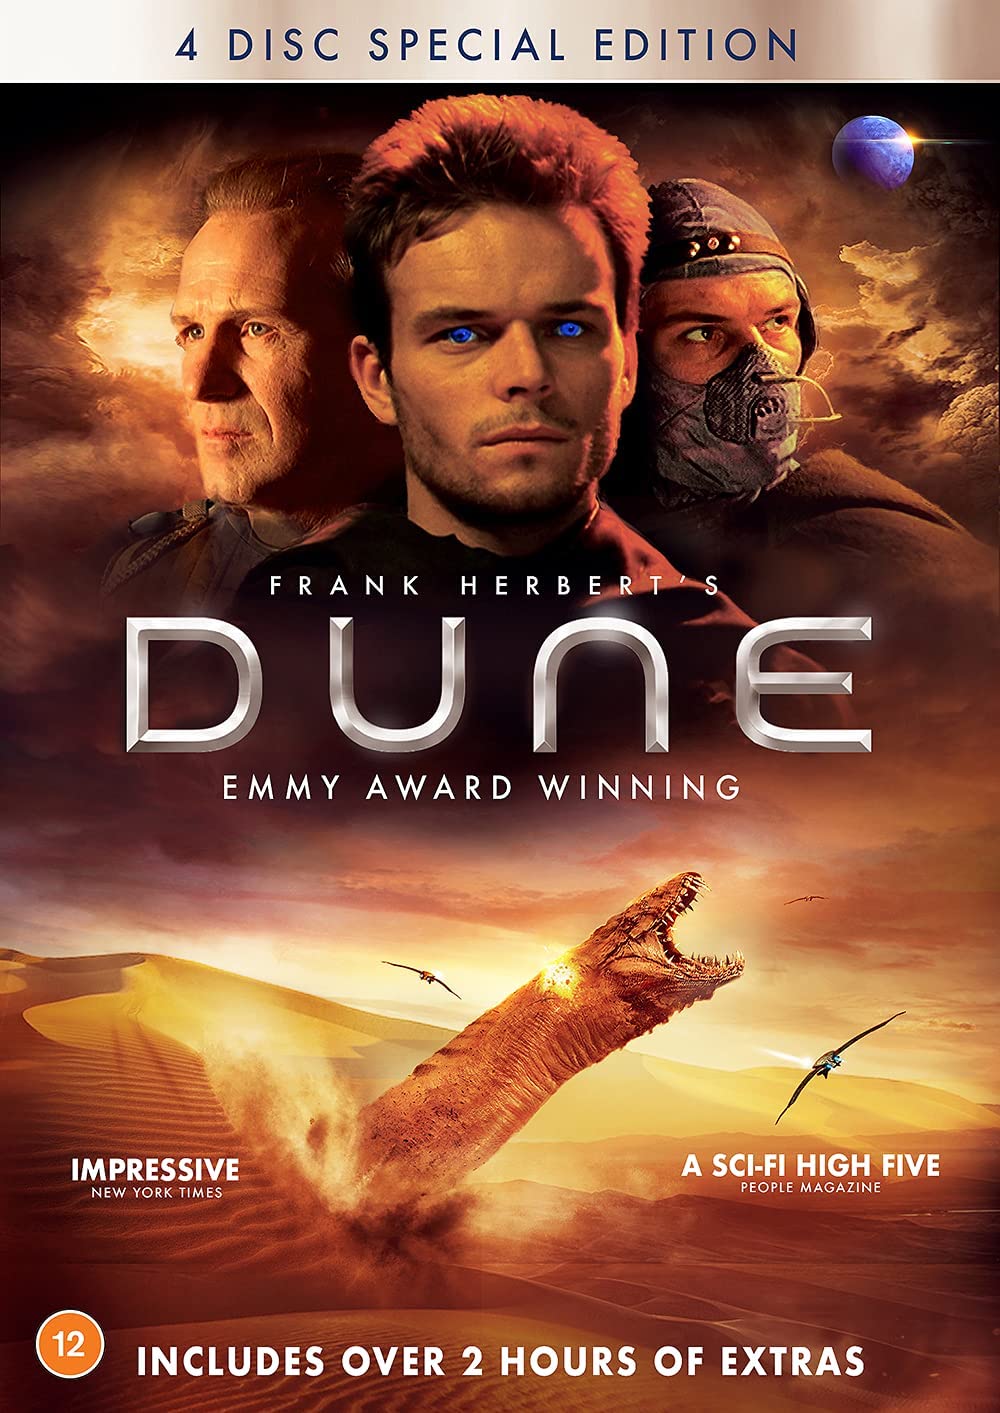 Frank Herbert's DUNE - 4 Disc Special Edition - Includes Over 2 Hours of Extras - Emmy Award Winning - [DVD]